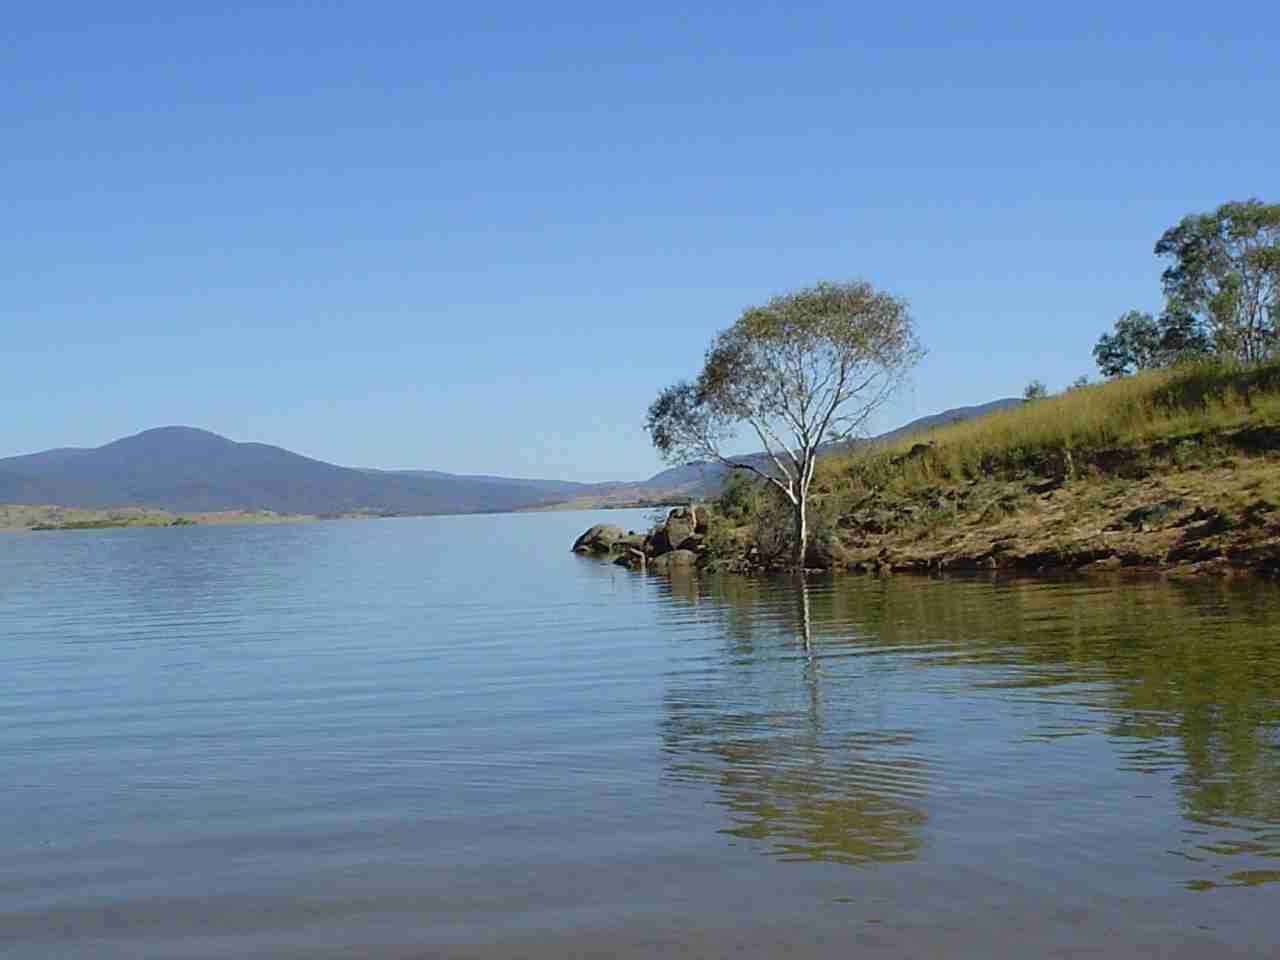 Lake Jindabyne, Australia, cover image for the sheet music to Seven Friendly Sketches (photo by Bill Kitson)